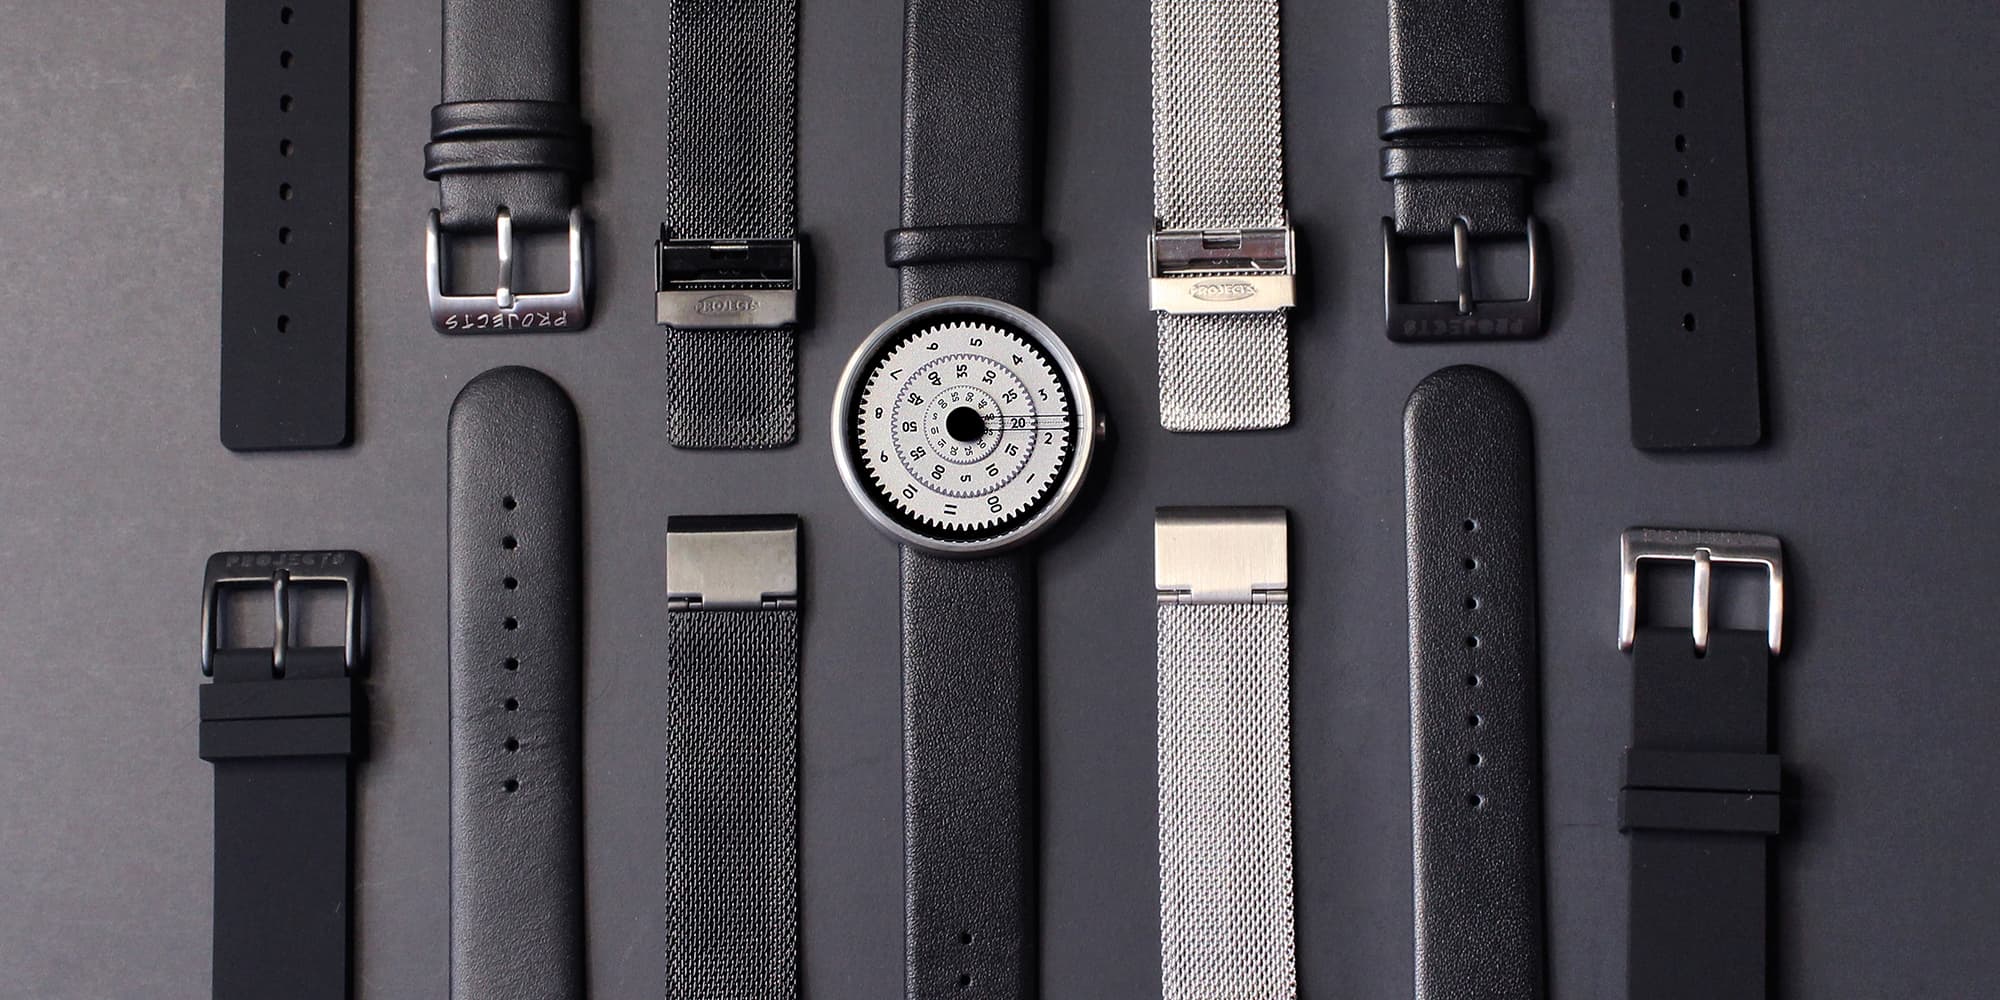 Projects Watches Crossover Black / Leather Band